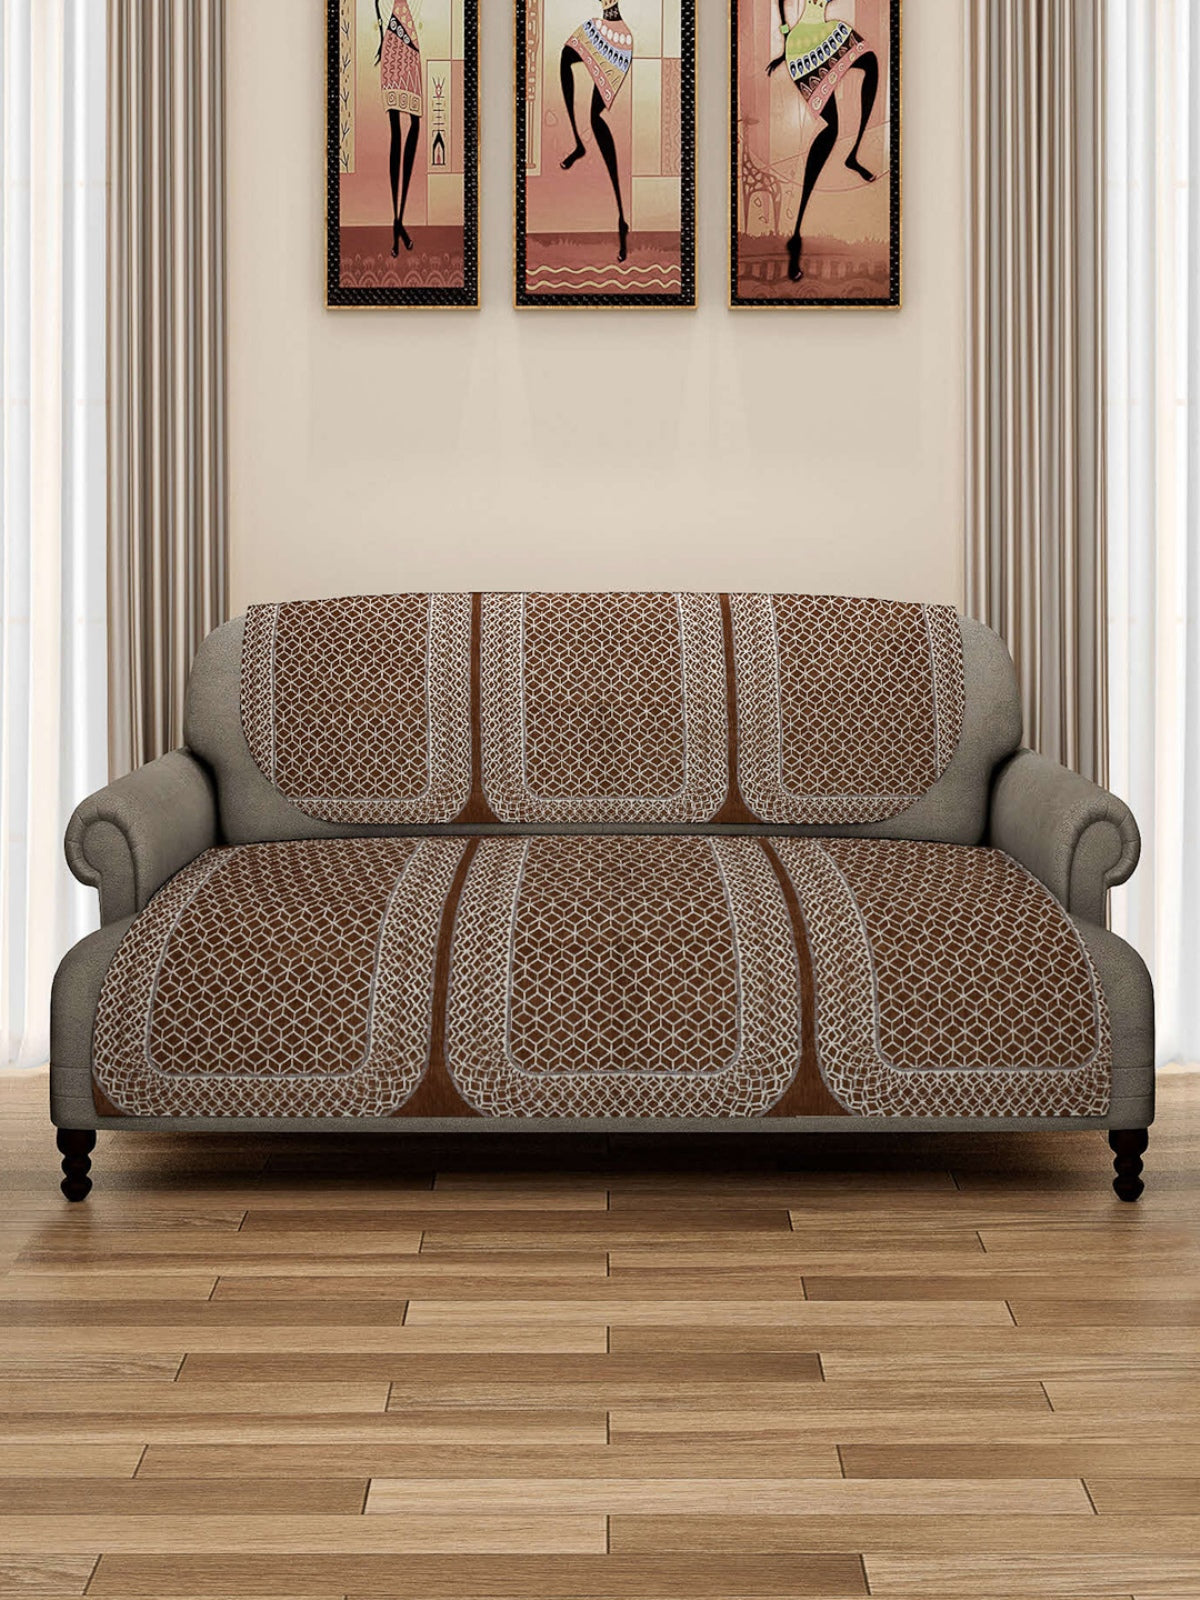 Romee 6-pieces brown geometric patterned 5-seater sofa covers slpss70